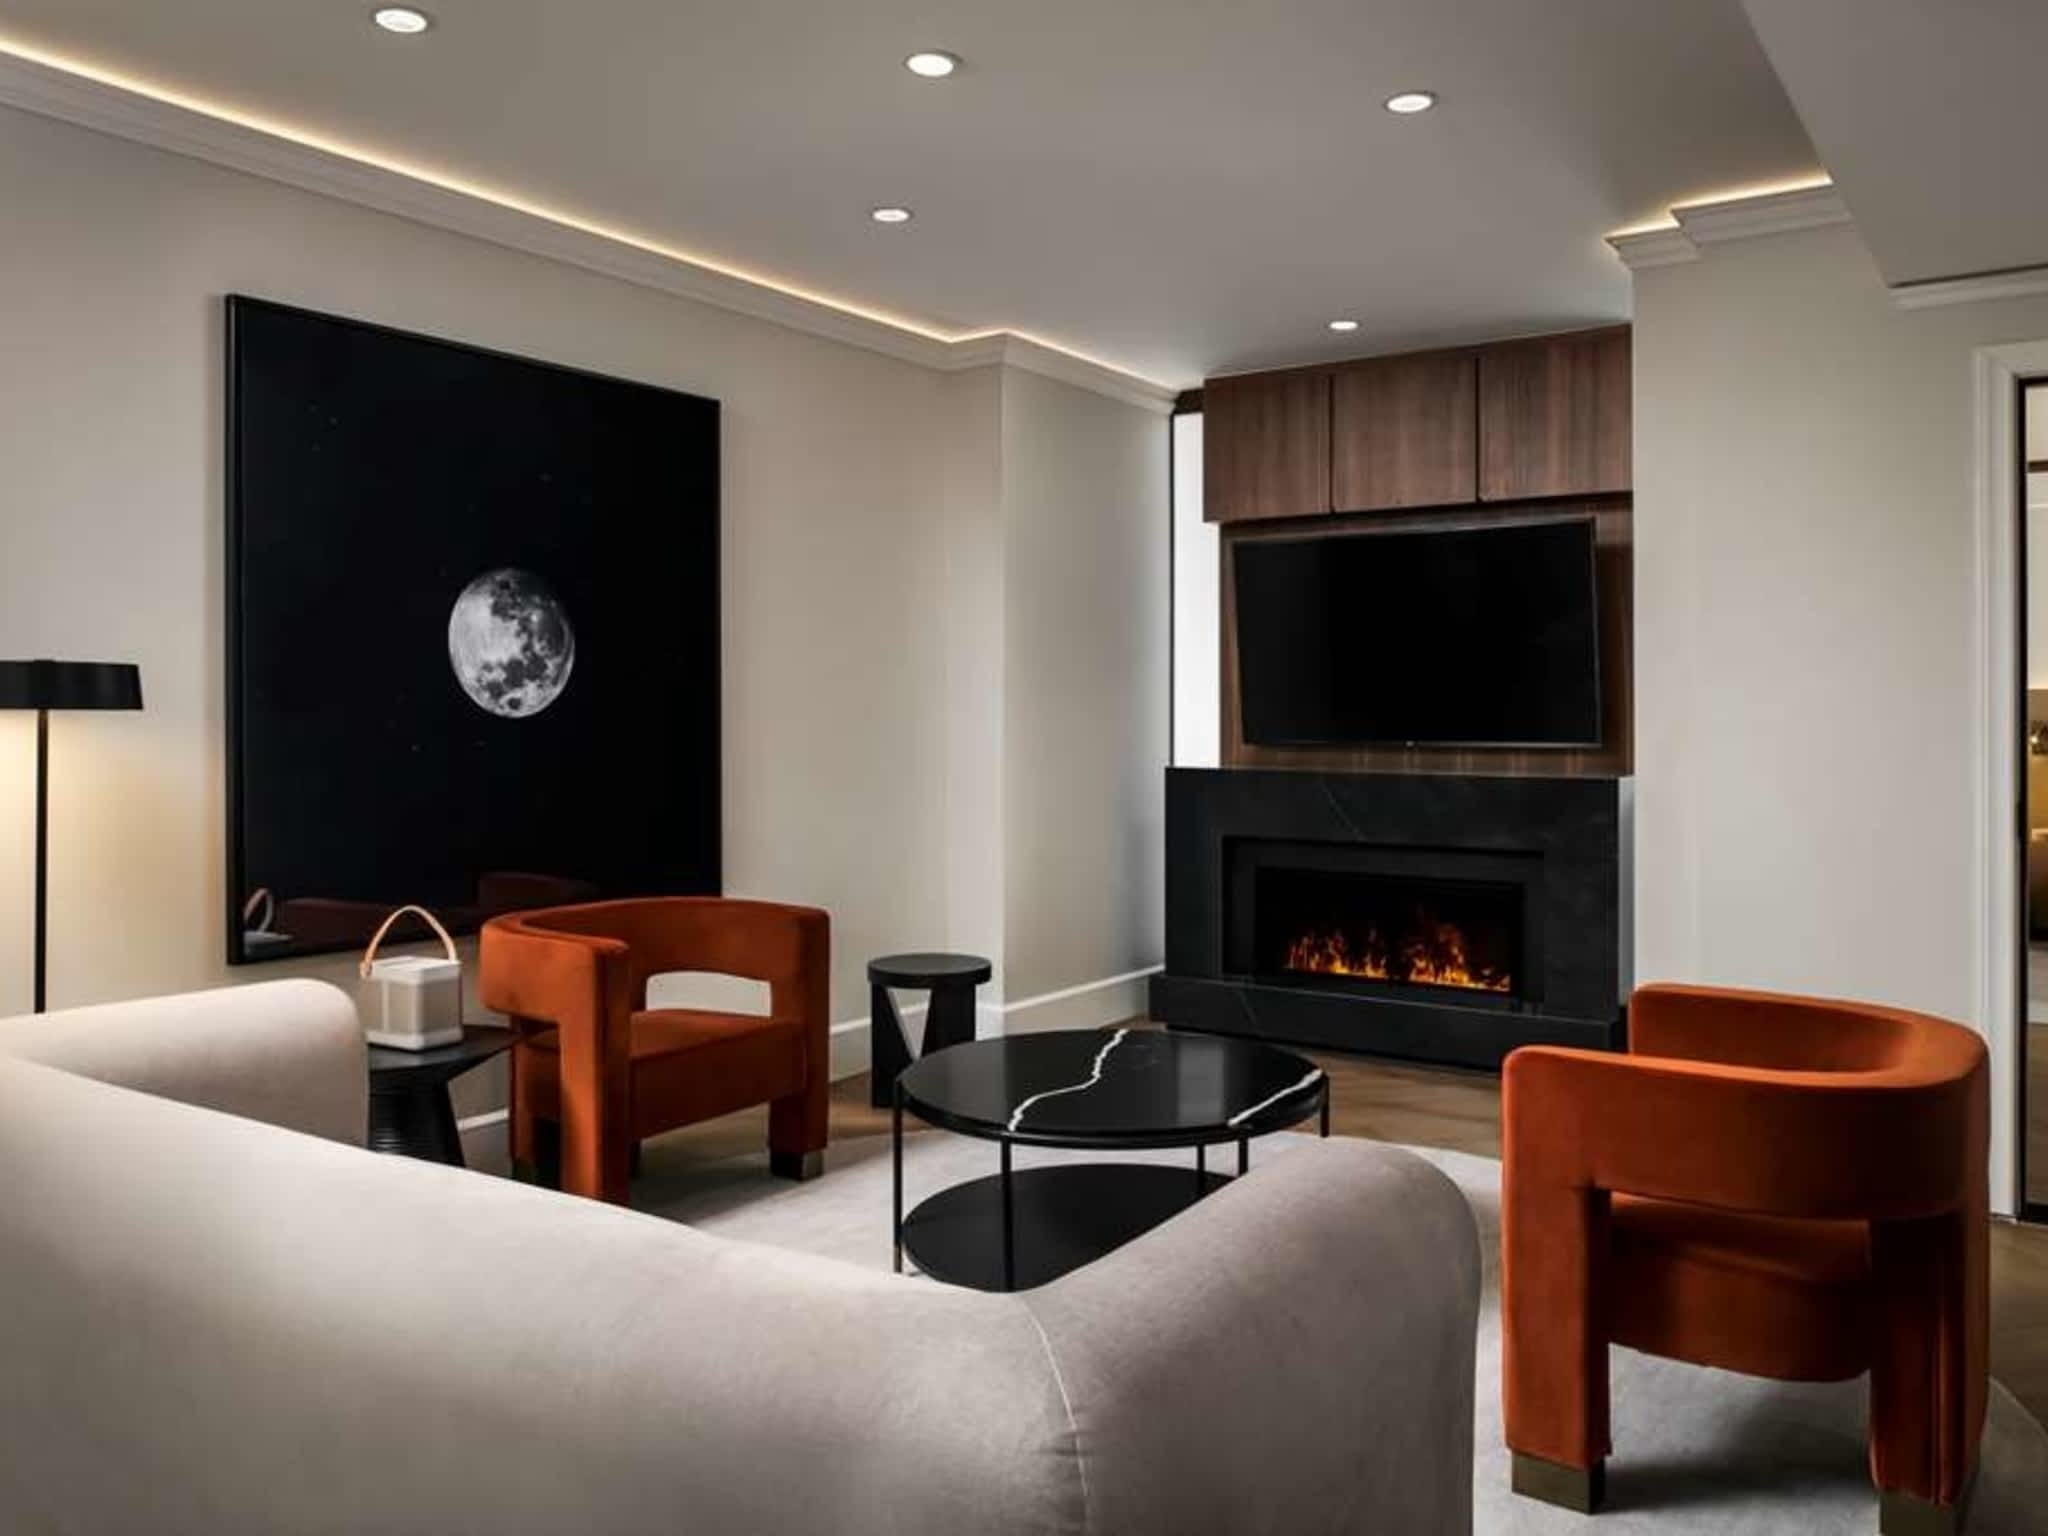 photo Vogue Hotel Montreal Downtown, Curio Collection by Hilton